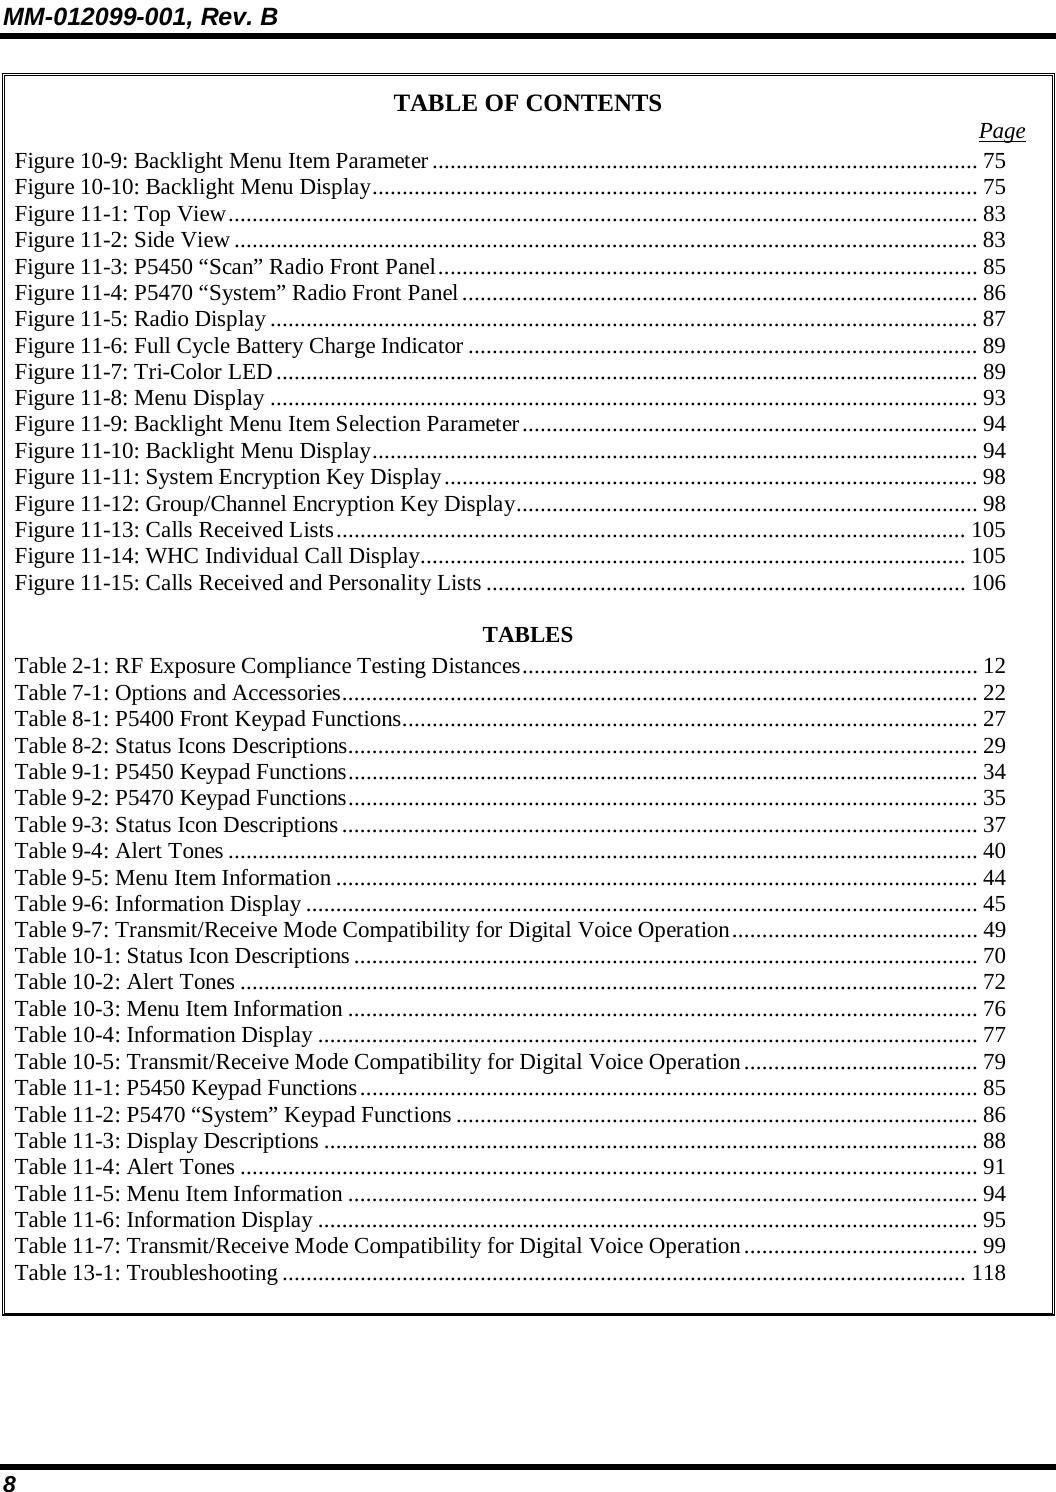 MM-012099-001, Rev. B 8 TABLE OF CONTENTS  Page Figure 10-9: Backlight Menu Item Parameter........................................................................................... 75 Figure 10-10: Backlight Menu Display..................................................................................................... 75 Figure 11-1: Top View............................................................................................................................. 83 Figure 11-2: Side View ............................................................................................................................ 83 Figure 11-3: P5450 “Scan” Radio Front Panel.......................................................................................... 85 Figure 11-4: P5470 “System” Radio Front Panel...................................................................................... 86 Figure 11-5: Radio Display...................................................................................................................... 87 Figure 11-6: Full Cycle Battery Charge Indicator ..................................................................................... 89 Figure 11-7: Tri-Color LED..................................................................................................................... 89 Figure 11-8: Menu Display ...................................................................................................................... 93 Figure 11-9: Backlight Menu Item Selection Parameter............................................................................94 Figure 11-10: Backlight Menu Display..................................................................................................... 94 Figure 11-11: System Encryption Key Display......................................................................................... 98 Figure 11-12: Group/Channel Encryption Key Display............................................................................. 98 Figure 11-13: Calls Received Lists......................................................................................................... 105 Figure 11-14: WHC Individual Call Display........................................................................................... 105 Figure 11-15: Calls Received and Personality Lists ................................................................................ 106 TABLES Table 2-1: RF Exposure Compliance Testing Distances............................................................................ 12 Table 7-1: Options and Accessories.......................................................................................................... 22 Table 8-1: P5400 Front Keypad Functions................................................................................................ 27 Table 8-2: Status Icons Descriptions......................................................................................................... 29 Table 9-1: P5450 Keypad Functions......................................................................................................... 34 Table 9-2: P5470 Keypad Functions......................................................................................................... 35 Table 9-3: Status Icon Descriptions.......................................................................................................... 37 Table 9-4: Alert Tones ............................................................................................................................. 40 Table 9-5: Menu Item Information ........................................................................................................... 44 Table 9-6: Information Display ................................................................................................................ 45 Table 9-7: Transmit/Receive Mode Compatibility for Digital Voice Operation......................................... 49 Table 10-1: Status Icon Descriptions ........................................................................................................ 70 Table 10-2: Alert Tones ........................................................................................................................... 72 Table 10-3: Menu Item Information ......................................................................................................... 76 Table 10-4: Information Display .............................................................................................................. 77 Table 10-5: Transmit/Receive Mode Compatibility for Digital Voice Operation....................................... 79 Table 11-1: P5450 Keypad Functions....................................................................................................... 85 Table 11-2: P5470 “System” Keypad Functions ....................................................................................... 86 Table 11-3: Display Descriptions ............................................................................................................. 88 Table 11-4: Alert Tones ........................................................................................................................... 91 Table 11-5: Menu Item Information ......................................................................................................... 94 Table 11-6: Information Display .............................................................................................................. 95 Table 11-7: Transmit/Receive Mode Compatibility for Digital Voice Operation....................................... 99 Table 13-1: Troubleshooting .................................................................................................................. 118   